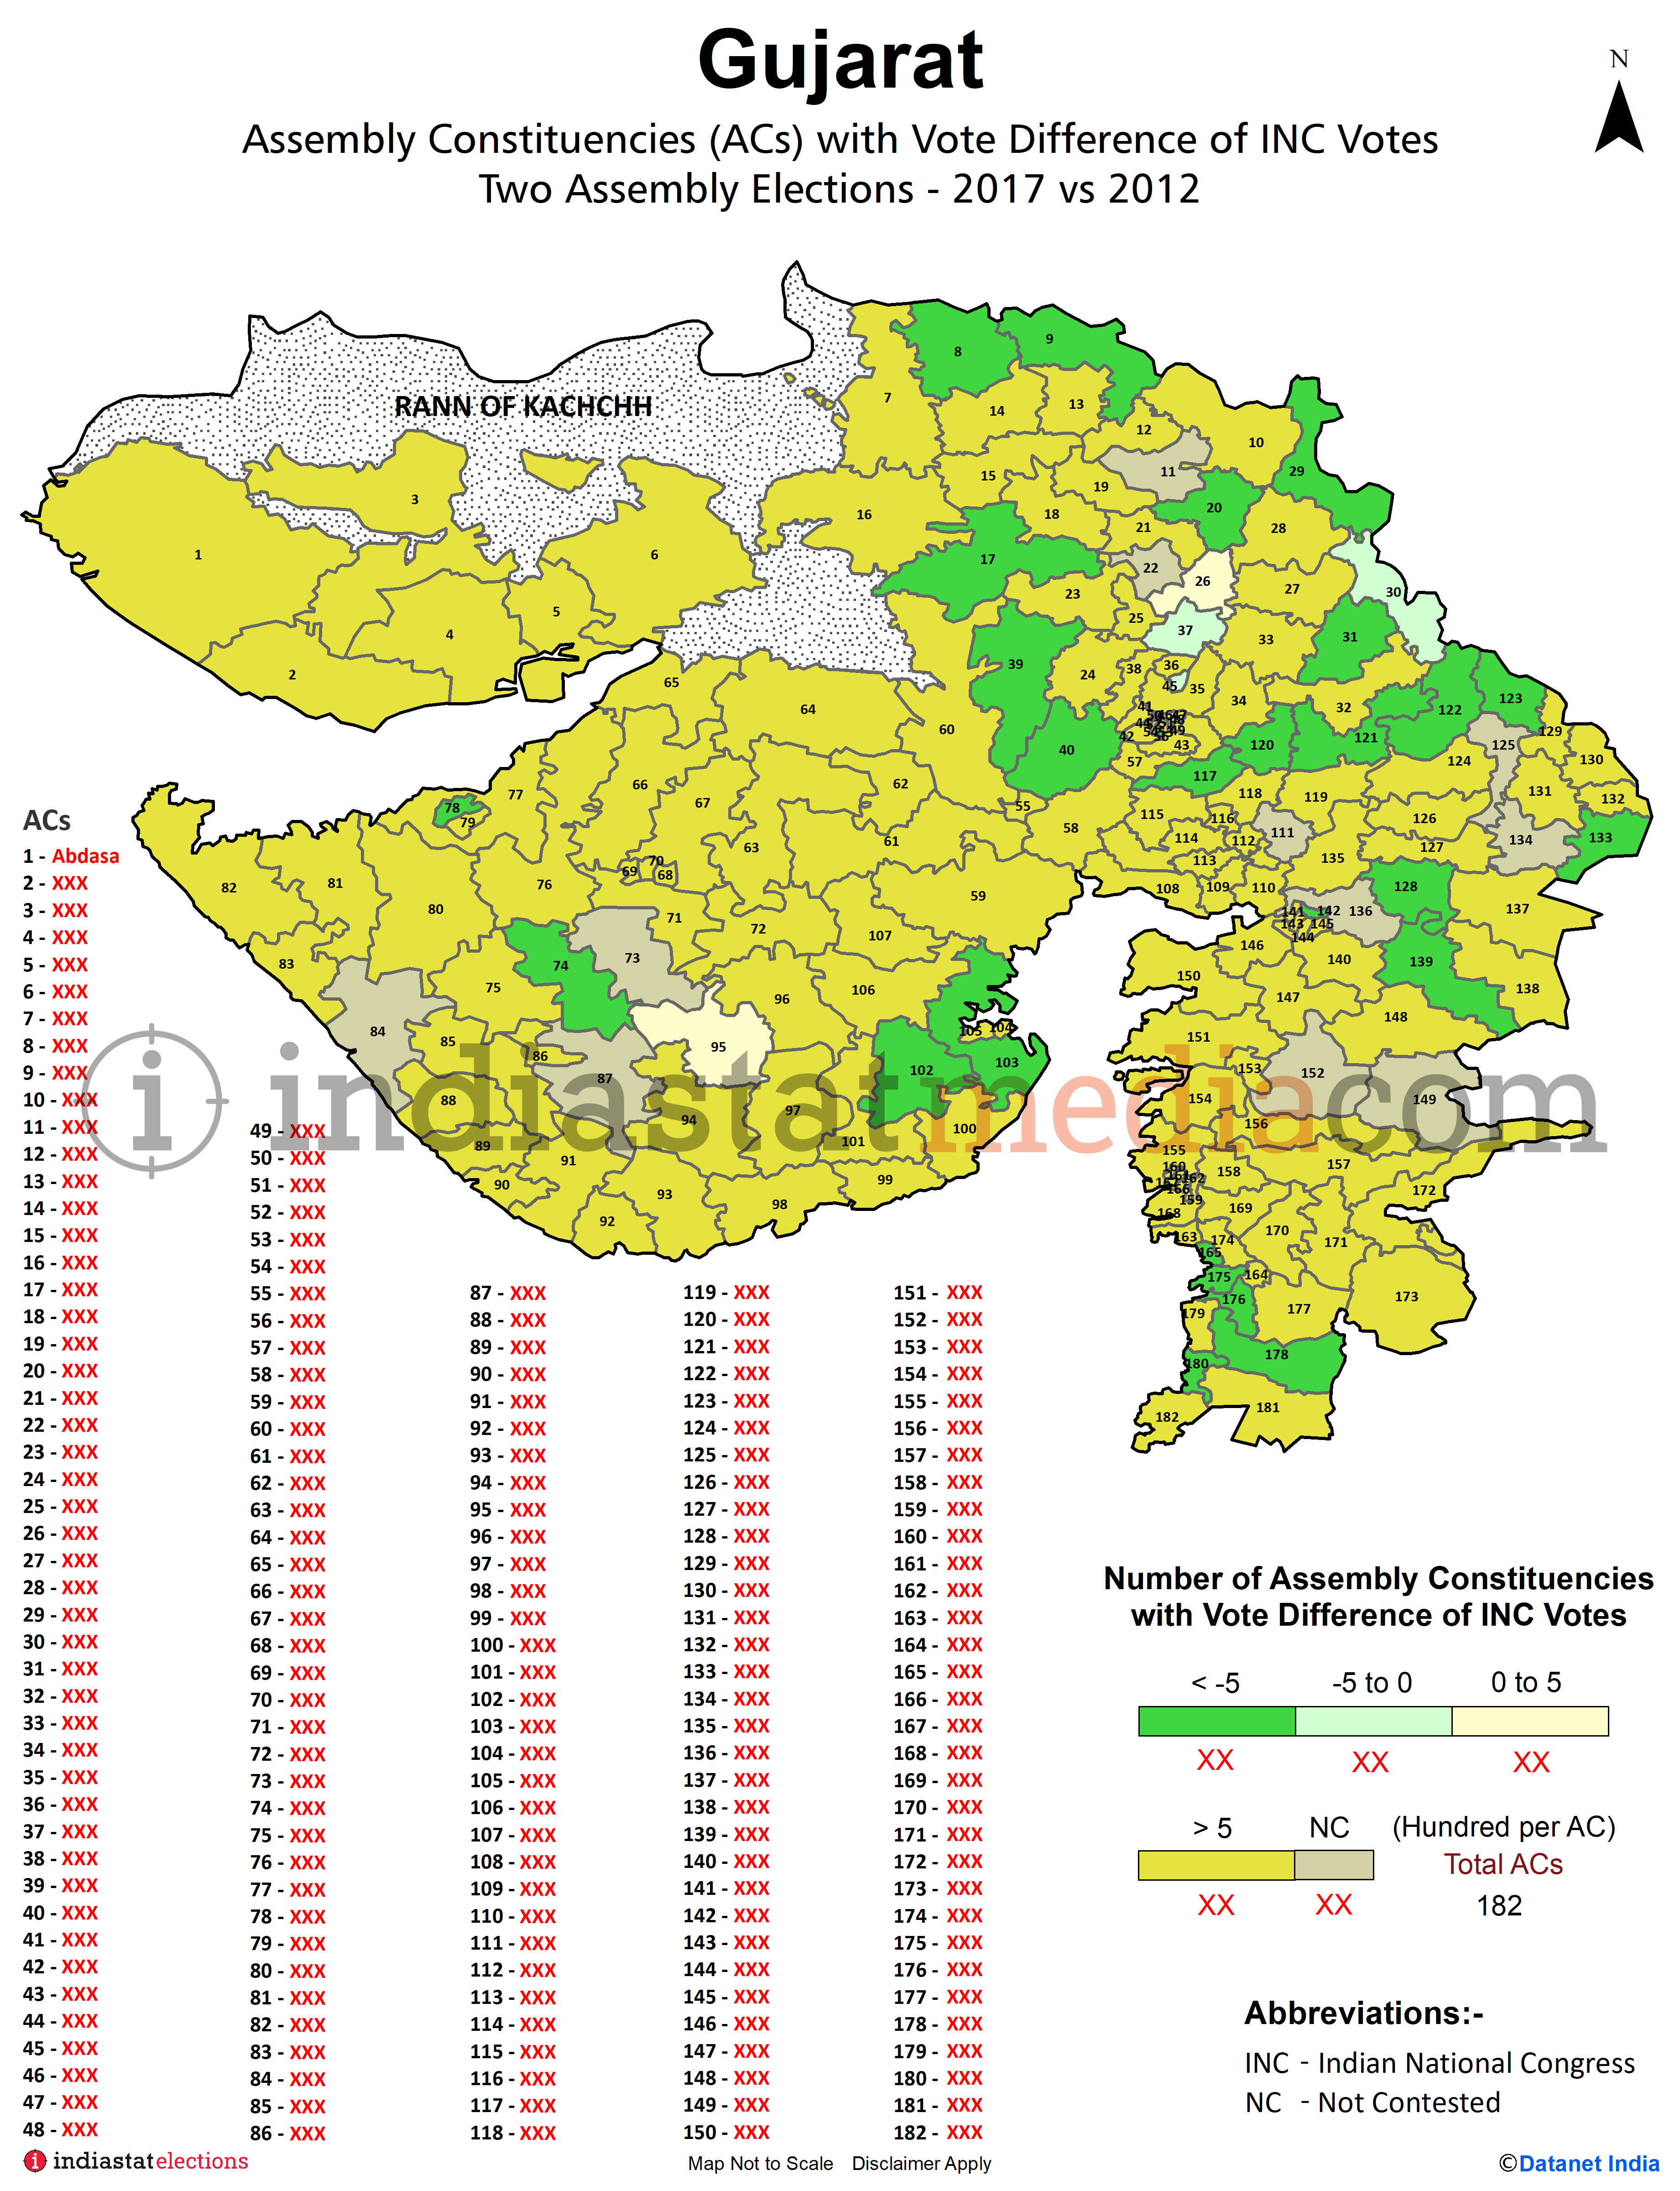 Assembly Constituencies with Vote Difference of INC Votes in Gujarat Assembly Election - 2012 & 2017